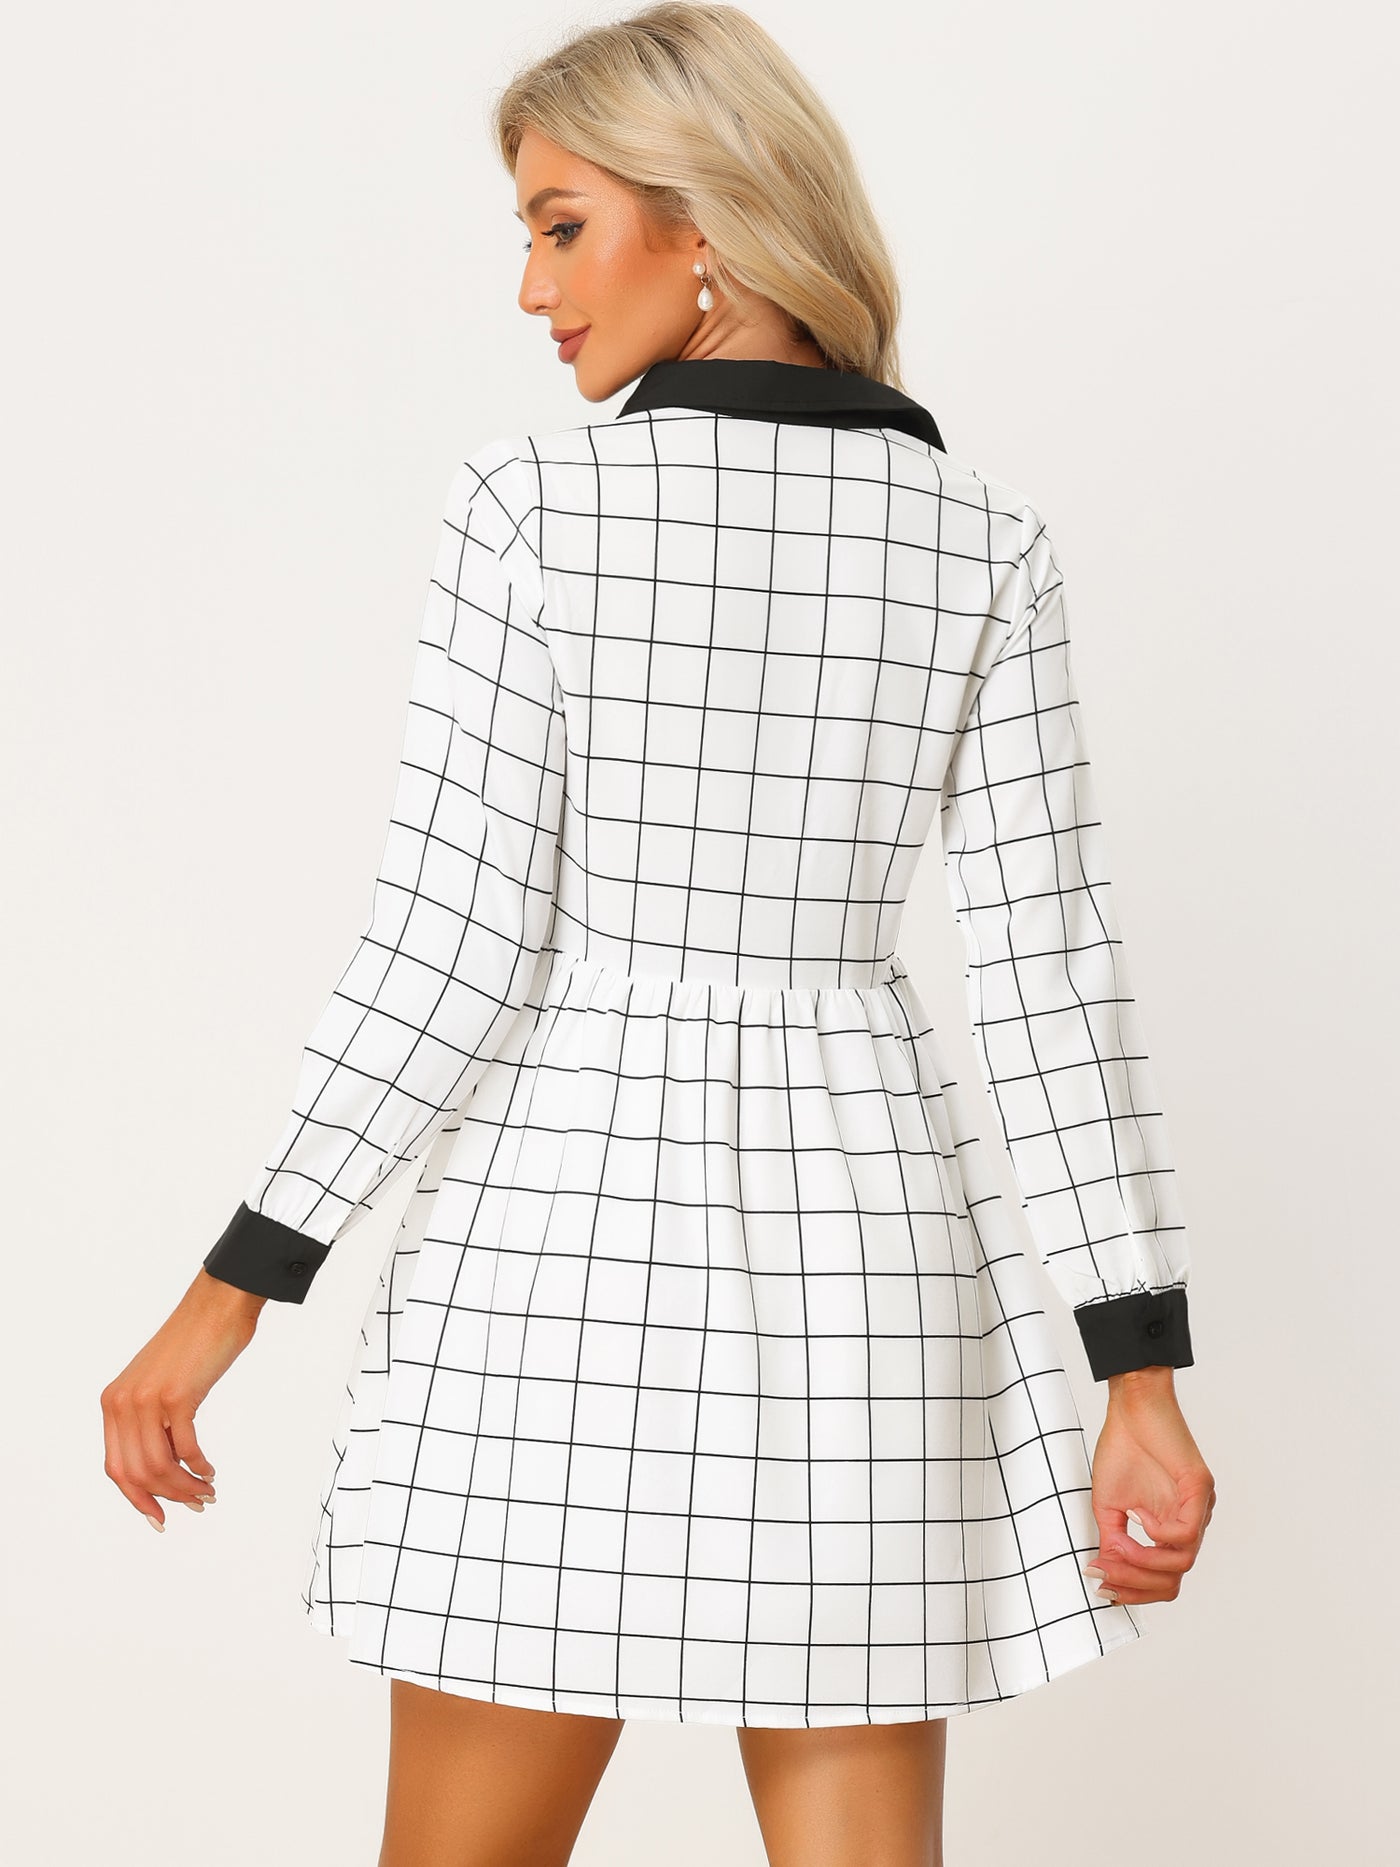 Allegra K Casual Grid Plaid Long Sleeve Contrast Color Collared Shirt Dress